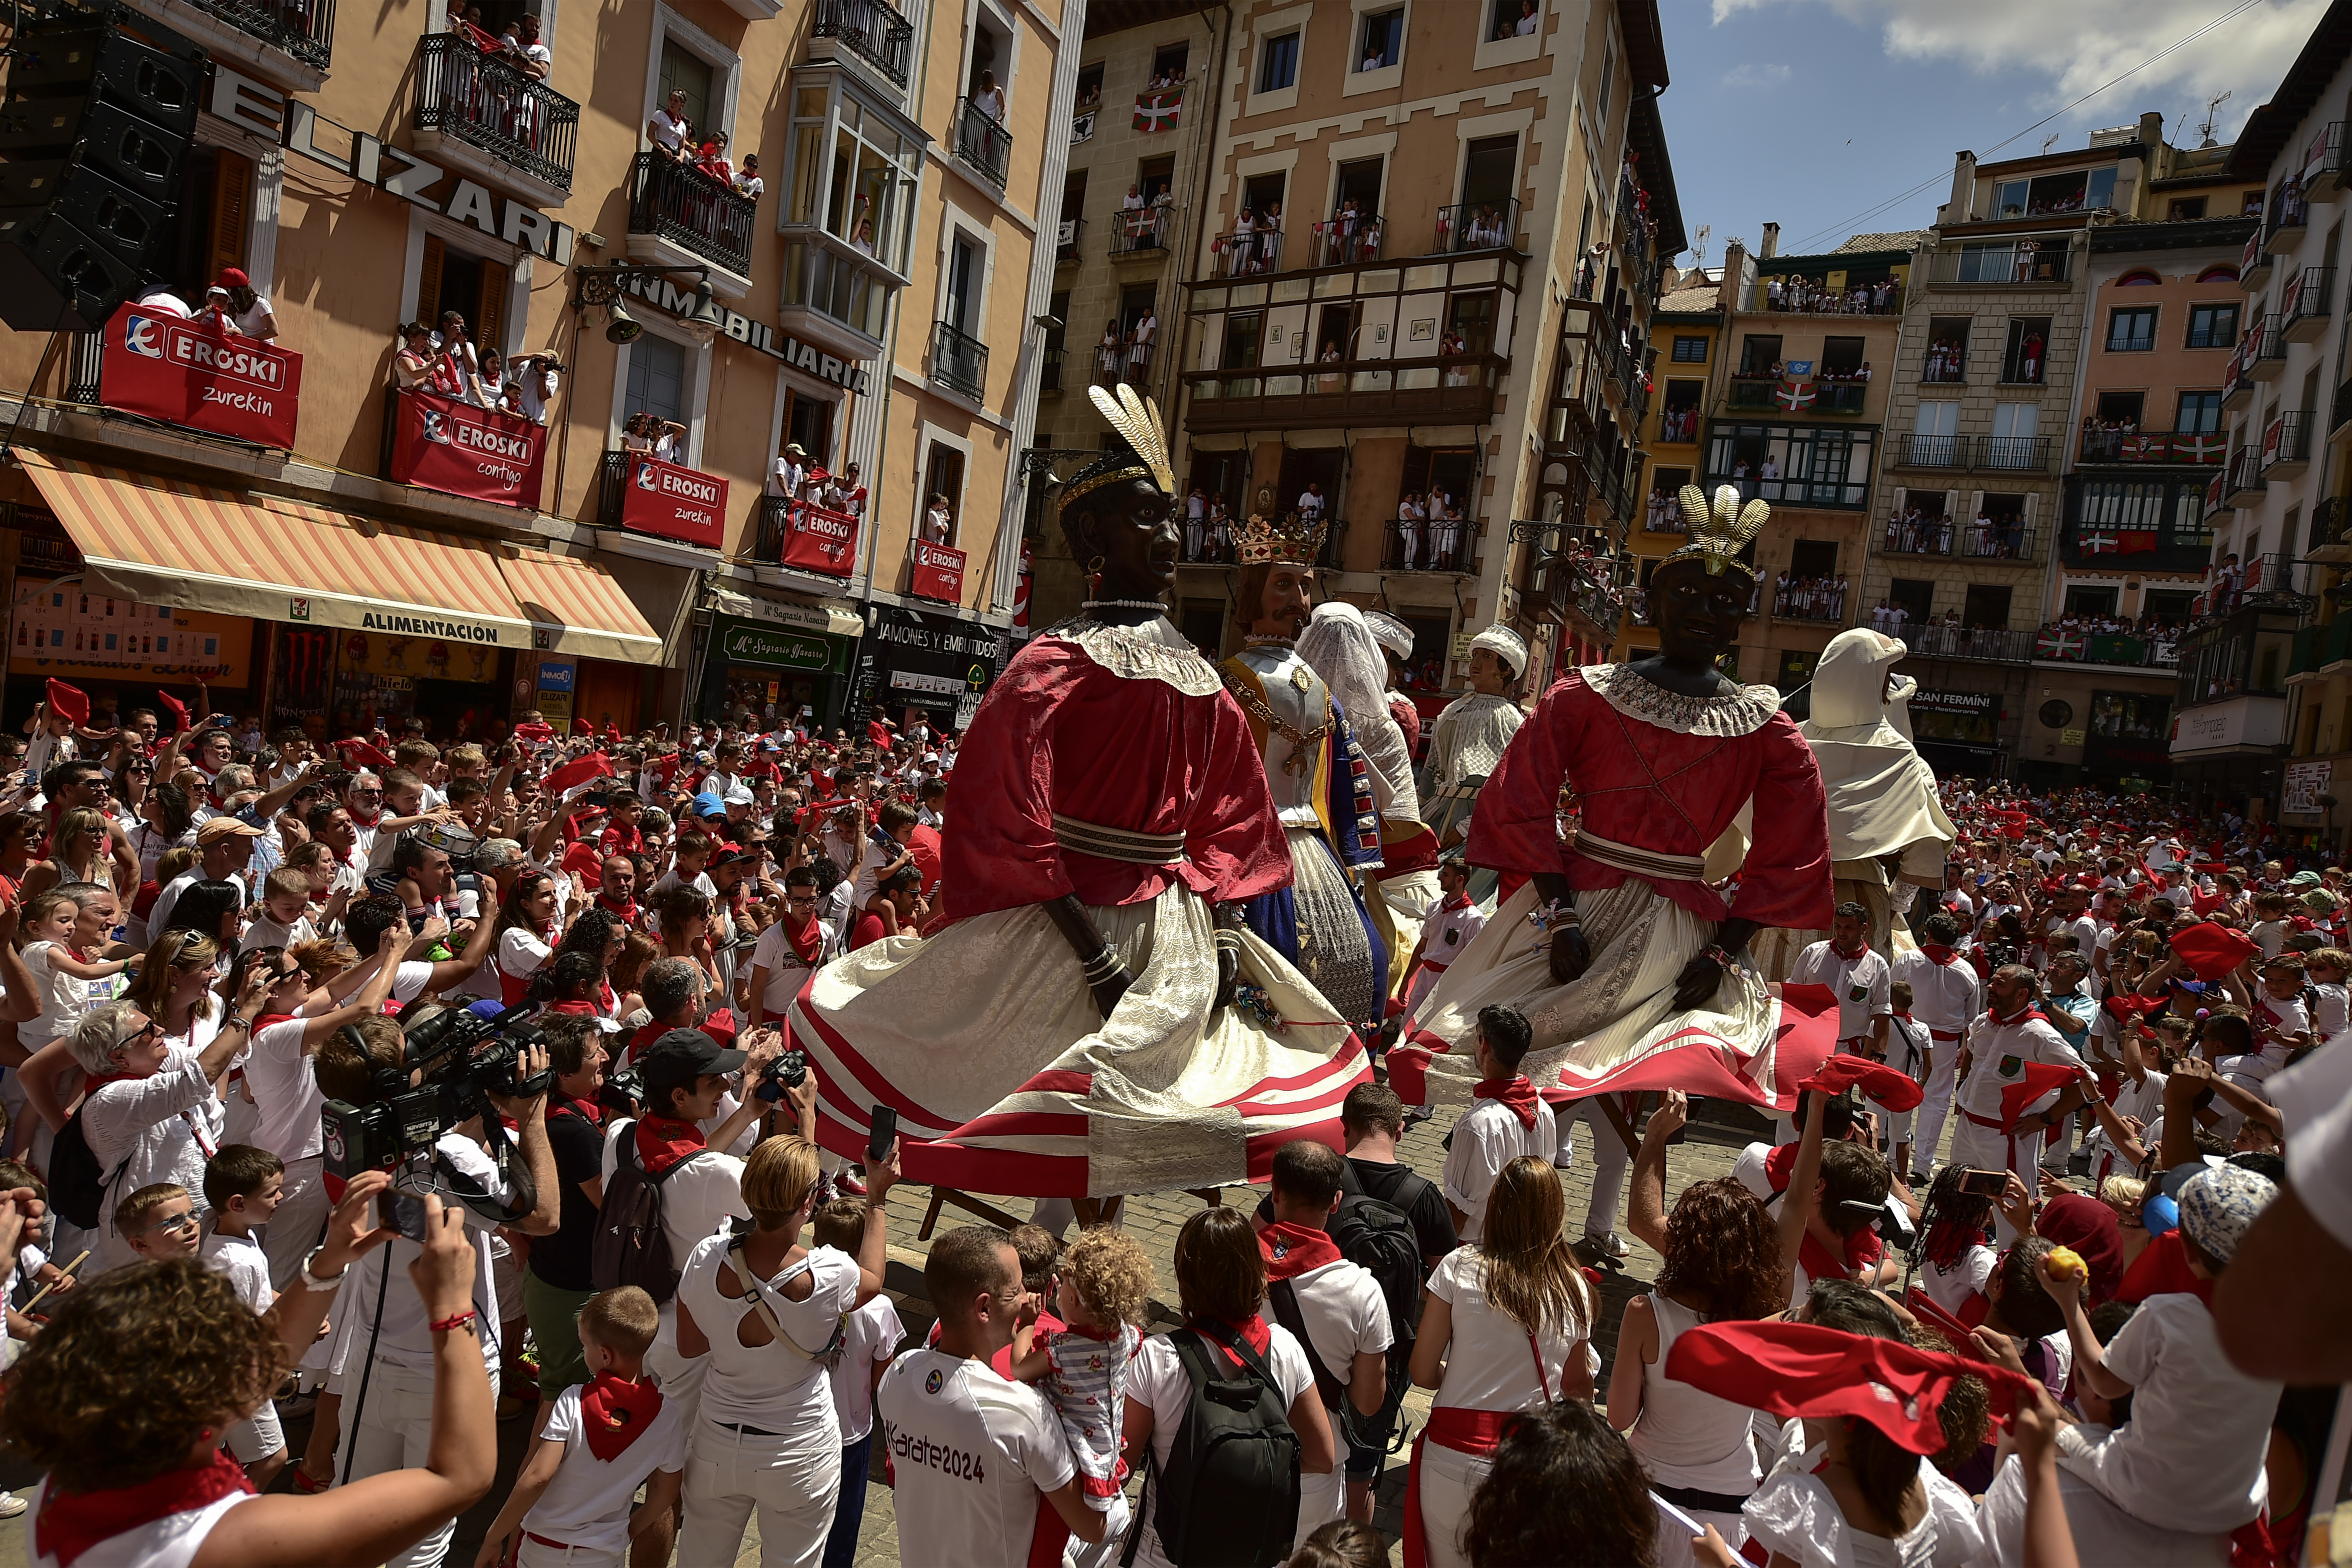 San Fermin's Comparsa Parade dance the last dance before saying good bye at the San Fermin Festival in Pamplona, northern Spain, Sunday July 14, 2018. Revellers from around the world flock to Pamplona every year to take part in the eight days of the running of the bulls. (AP Photo/Alvaro Barrientos)